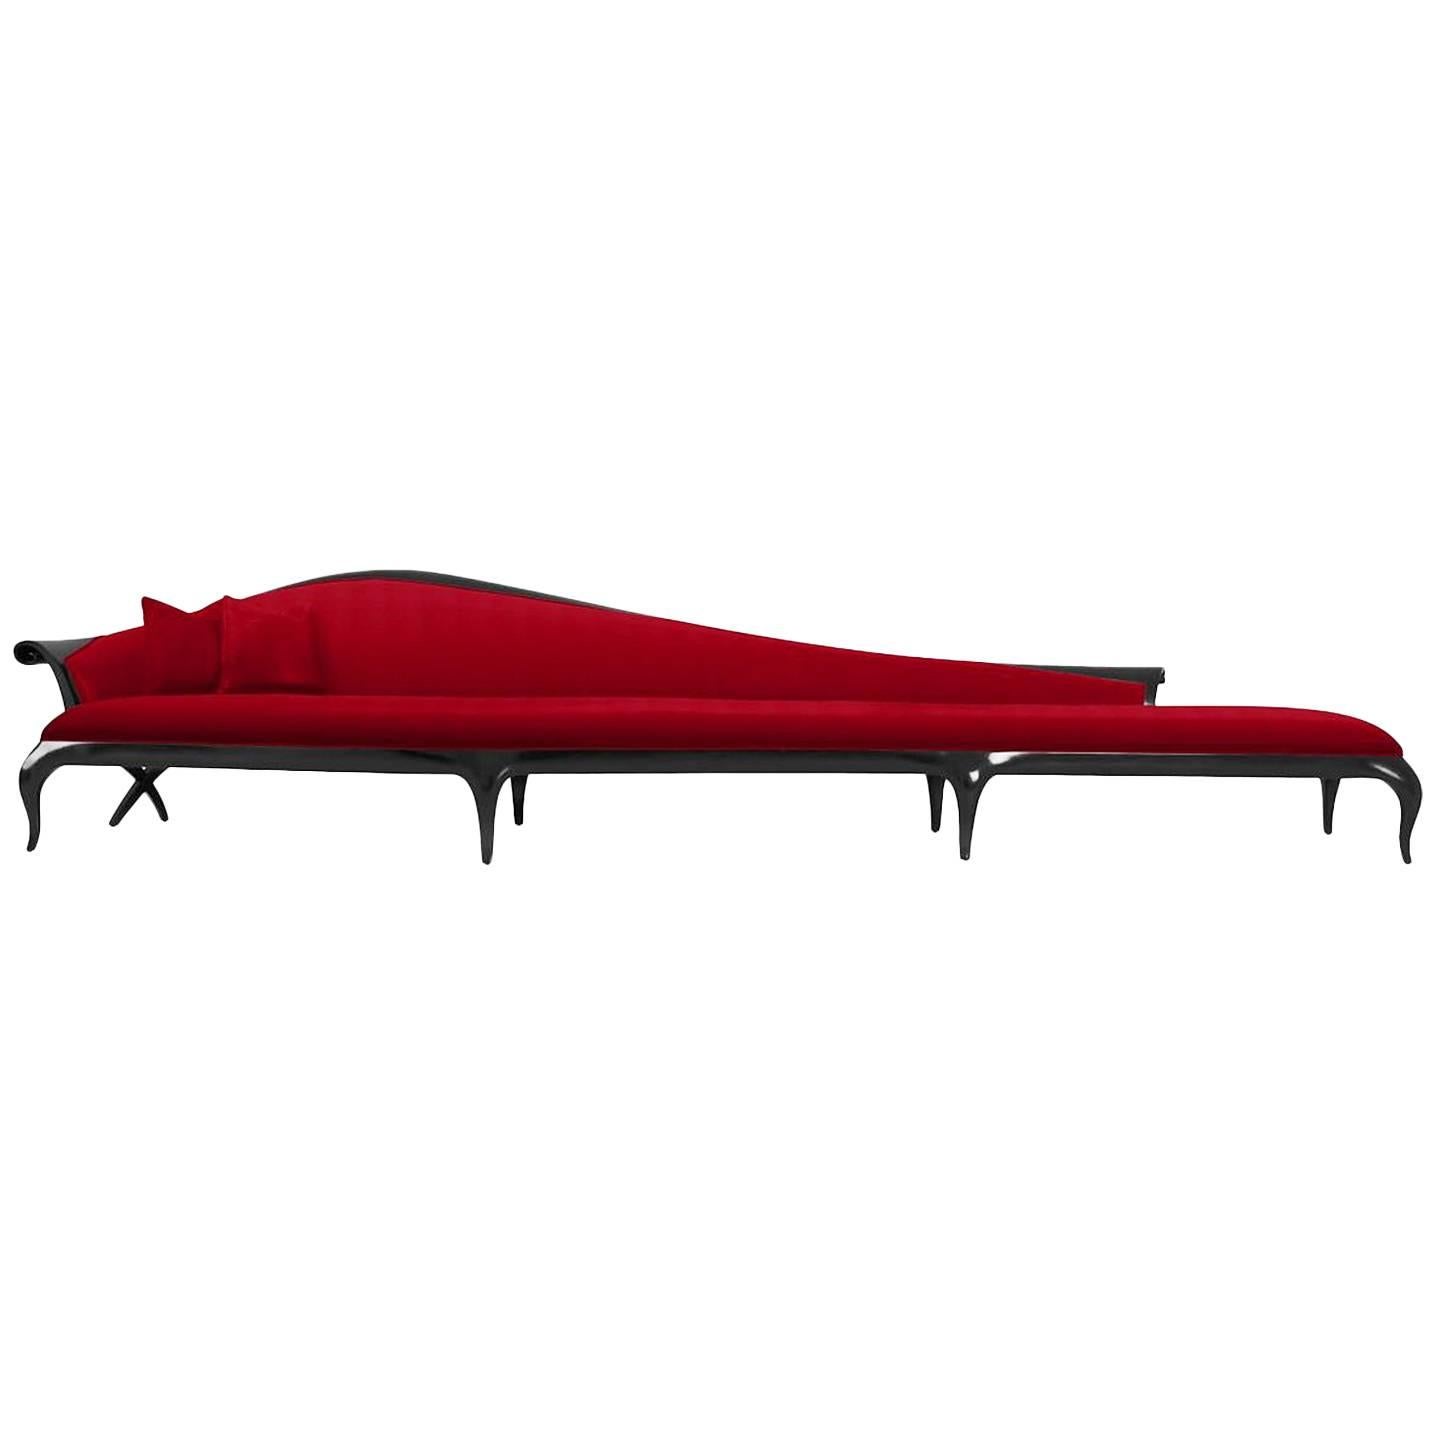 Carla Extra Large Sofa, Solid Varnished Mahogany Structure and Red Velvet Fabric